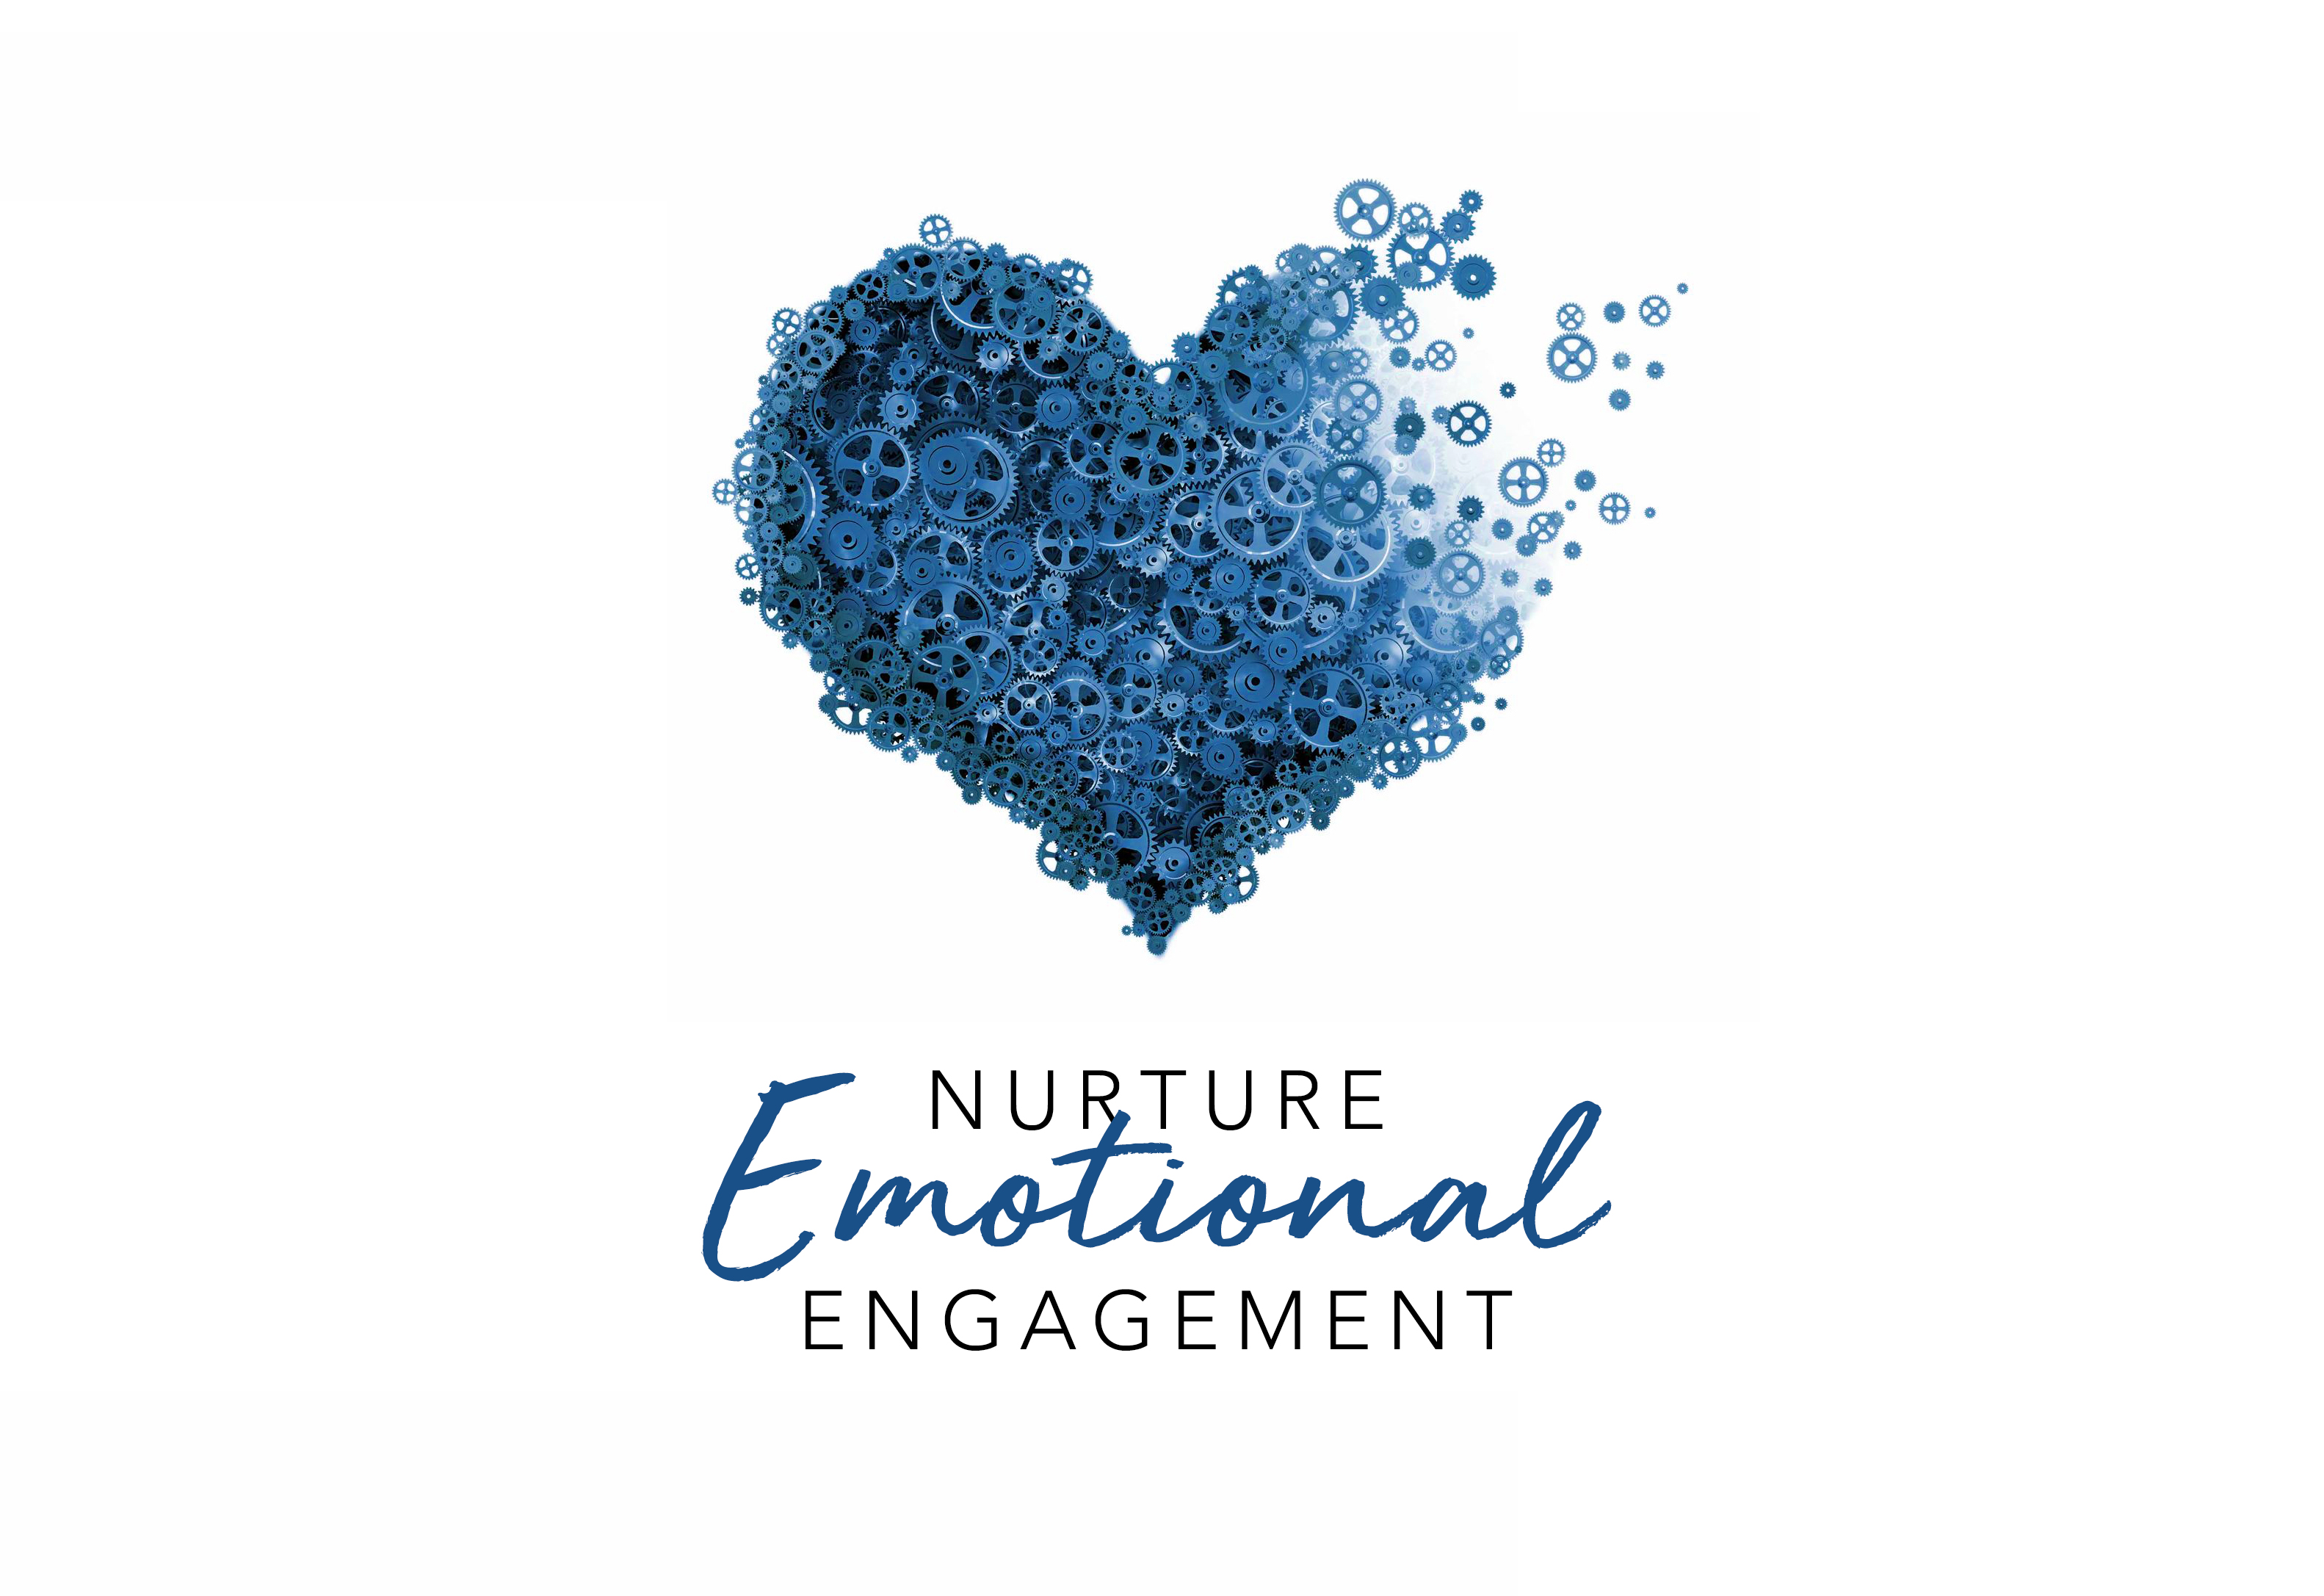 7 Ways Facilitators Can Nurture Emotional Engagement in the Virtual Classroom